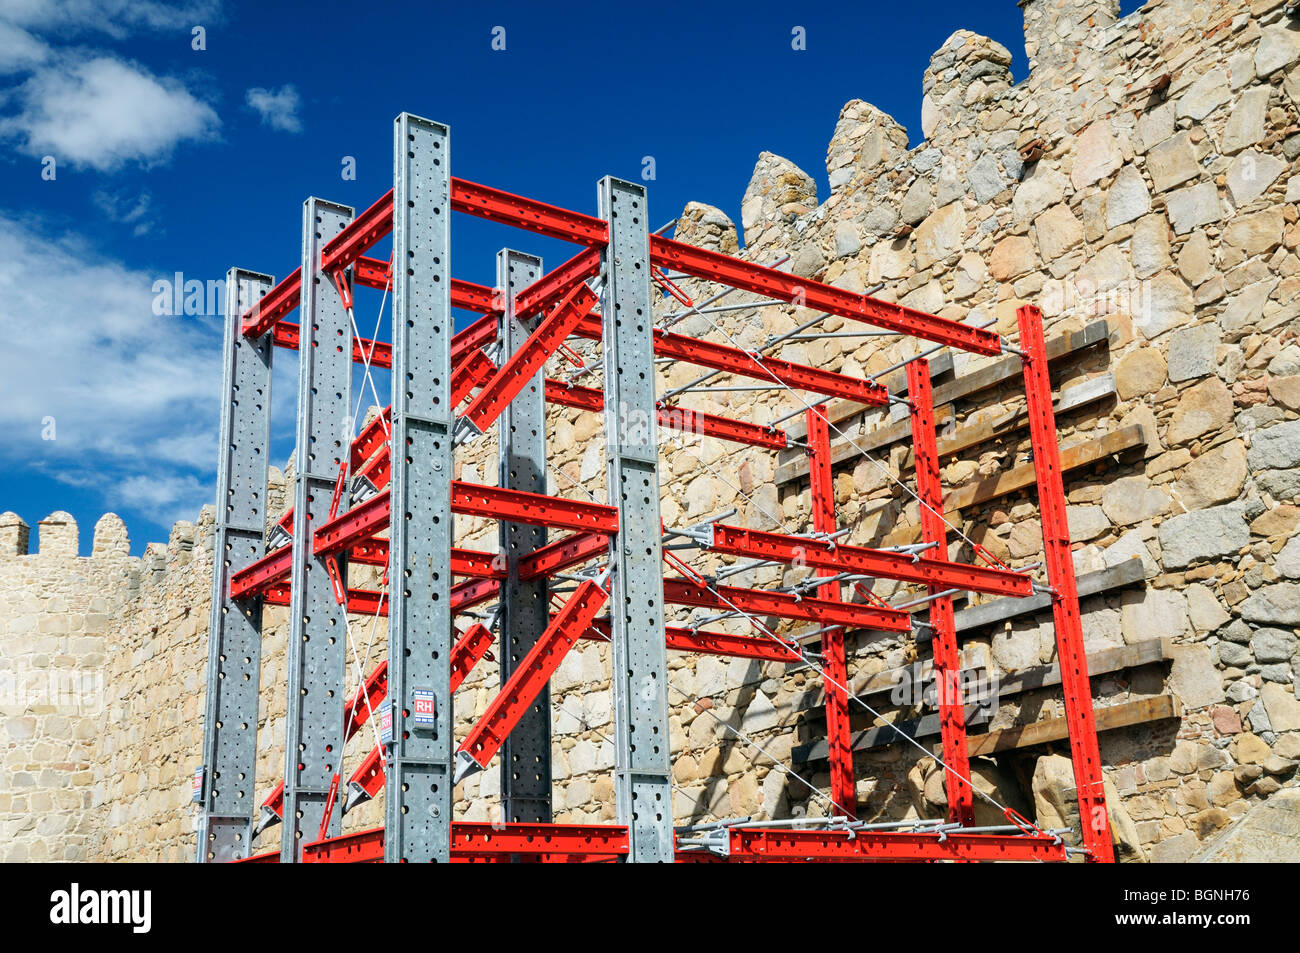 Specialized scaffolding steel girders for structural reinforcement, City walls of Avila, Spain Stock Photo